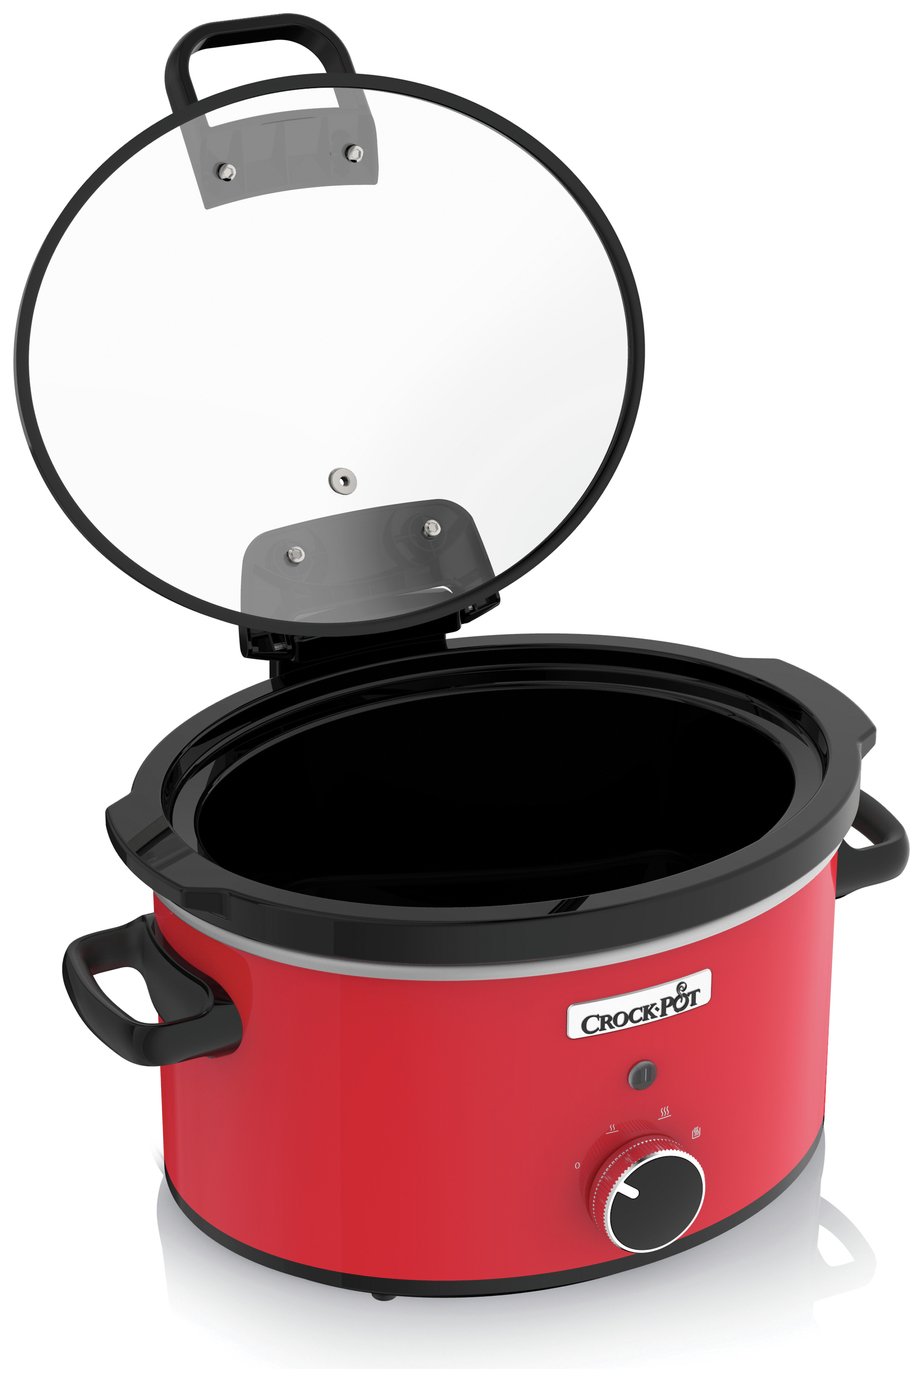 Crock-Pot 3.5L Hinged Slow Cooker - Red Reviews